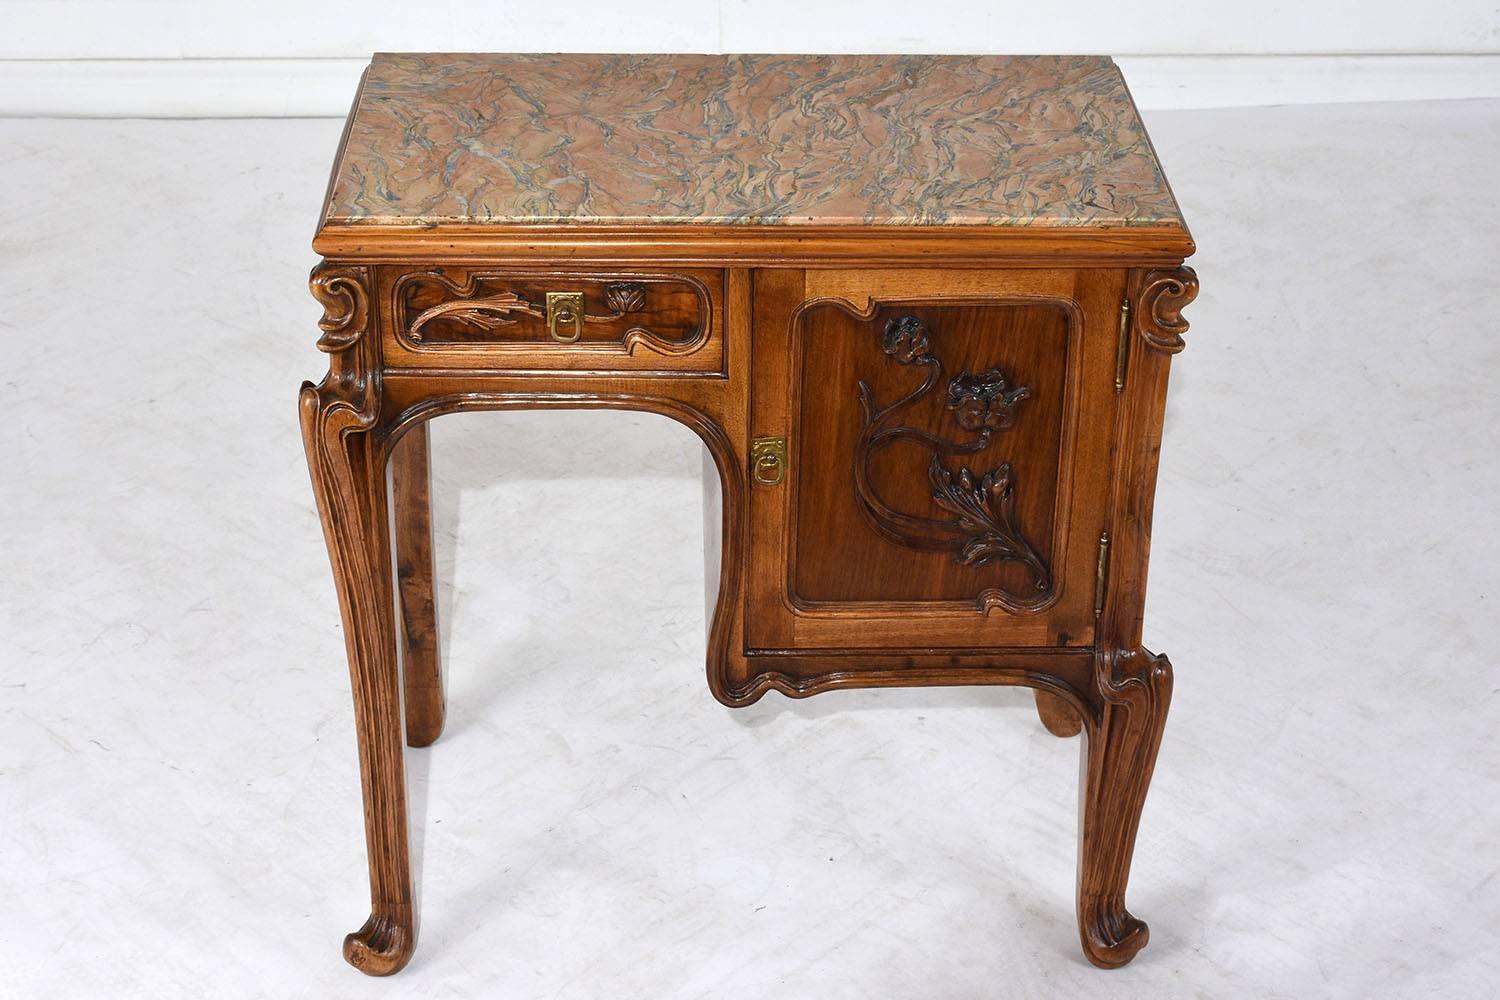 This rare, 1900s Art Nouveau nightstand or side table is made is made in the manner of Louis Majorelle. The nightstand is made of walnut wood in its original walnut color stain and has recently been polished and waxed. This nightstand is